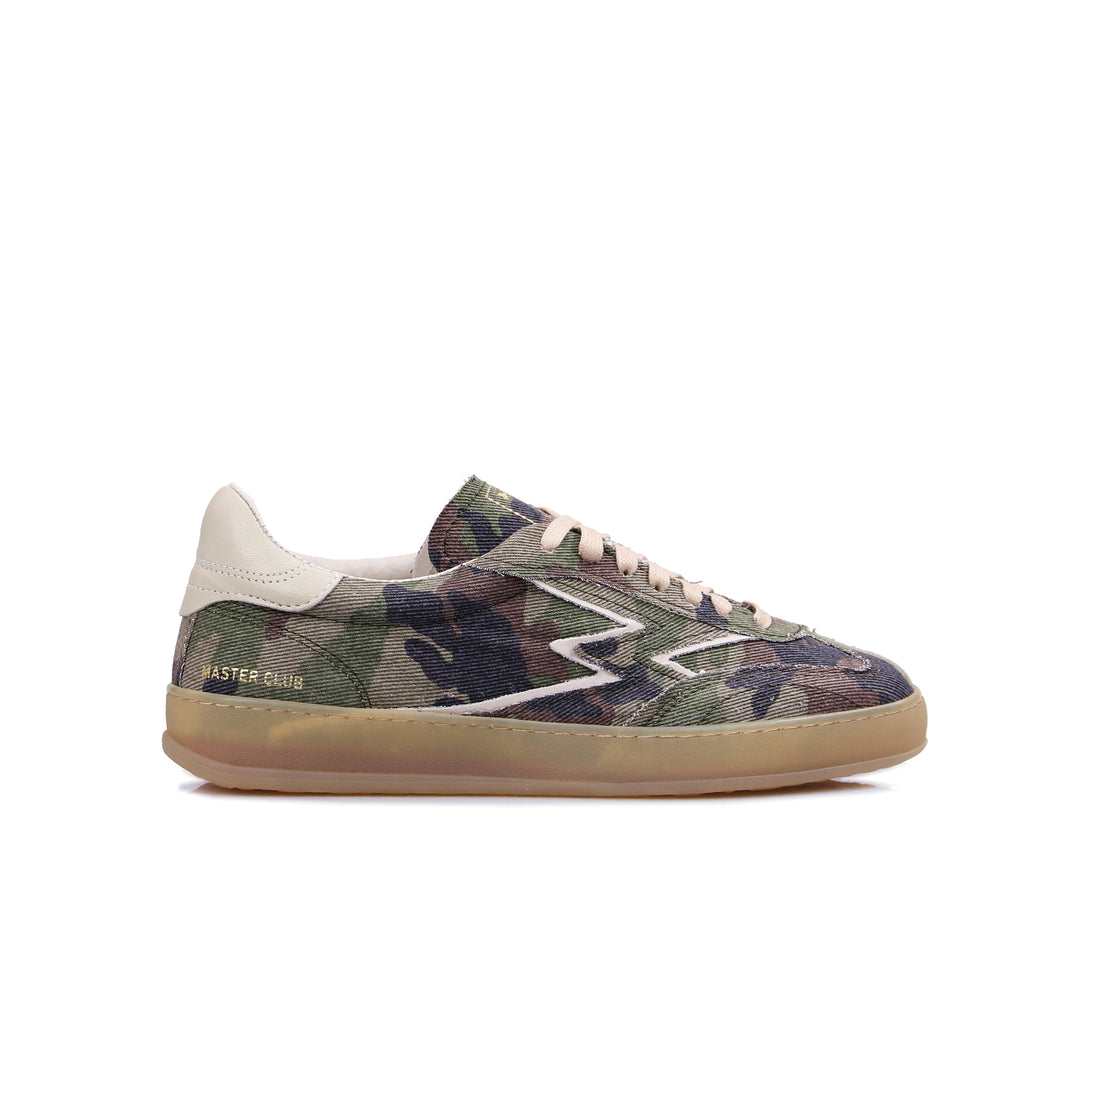 Club Camouflage sneakers